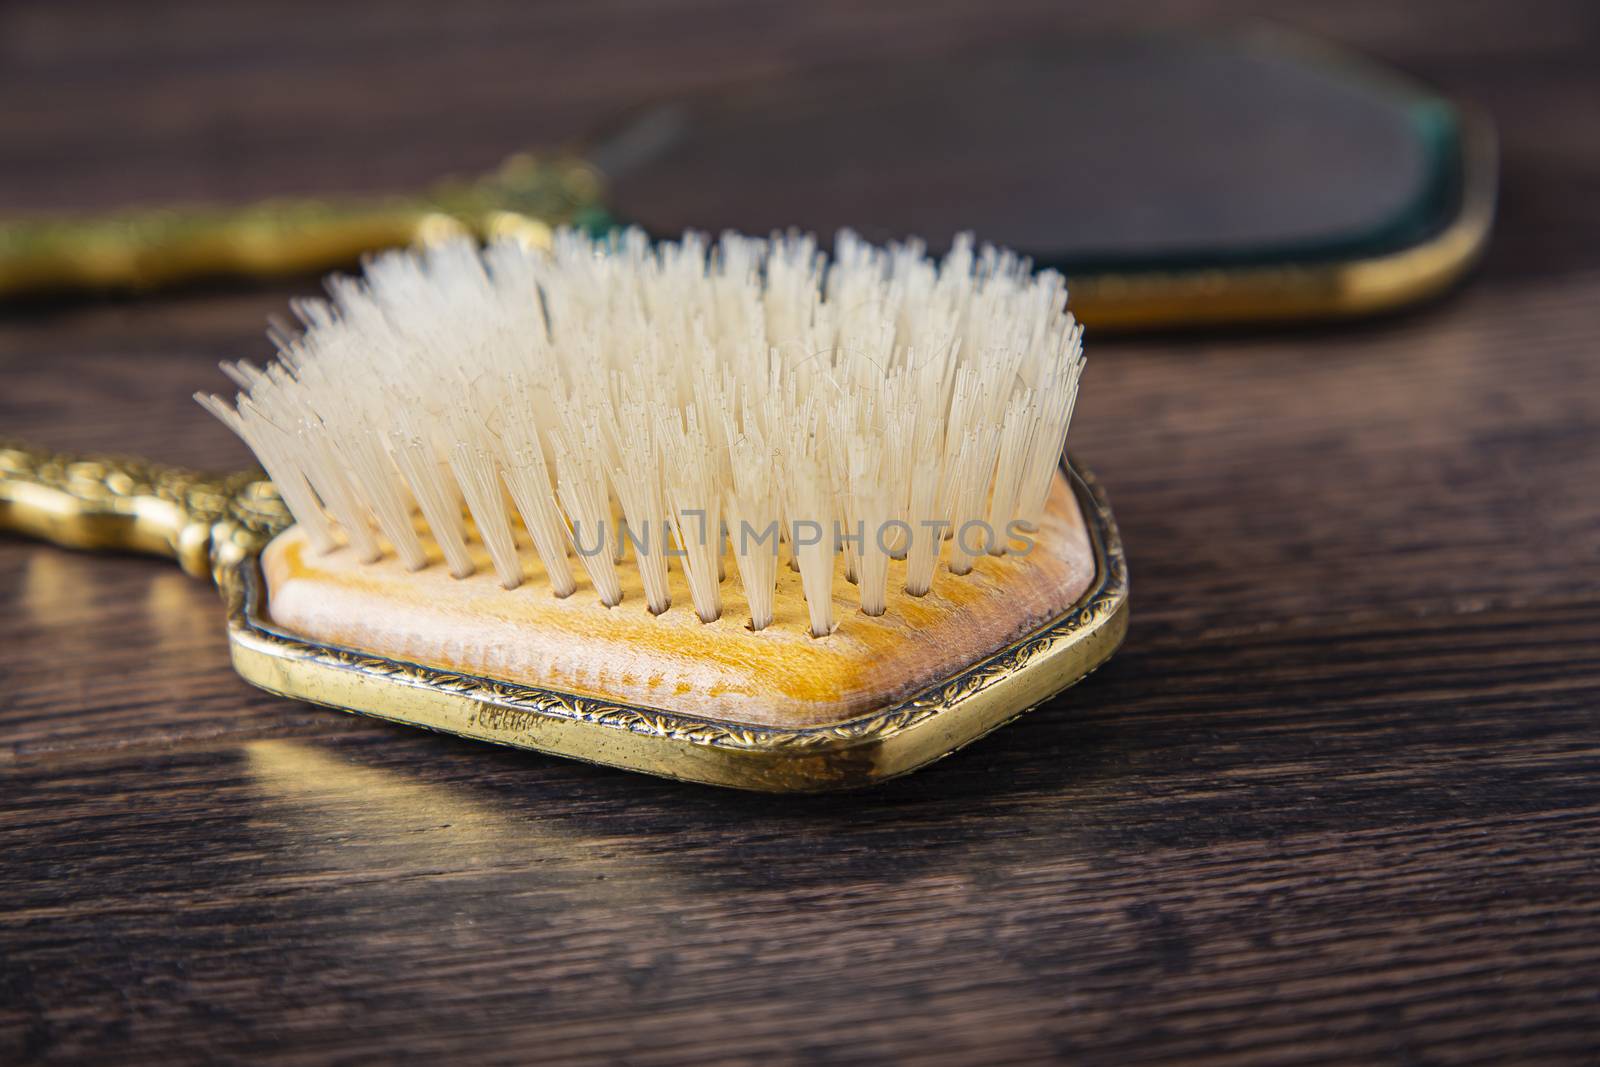 Antique hair brush and mirror by mypstudio